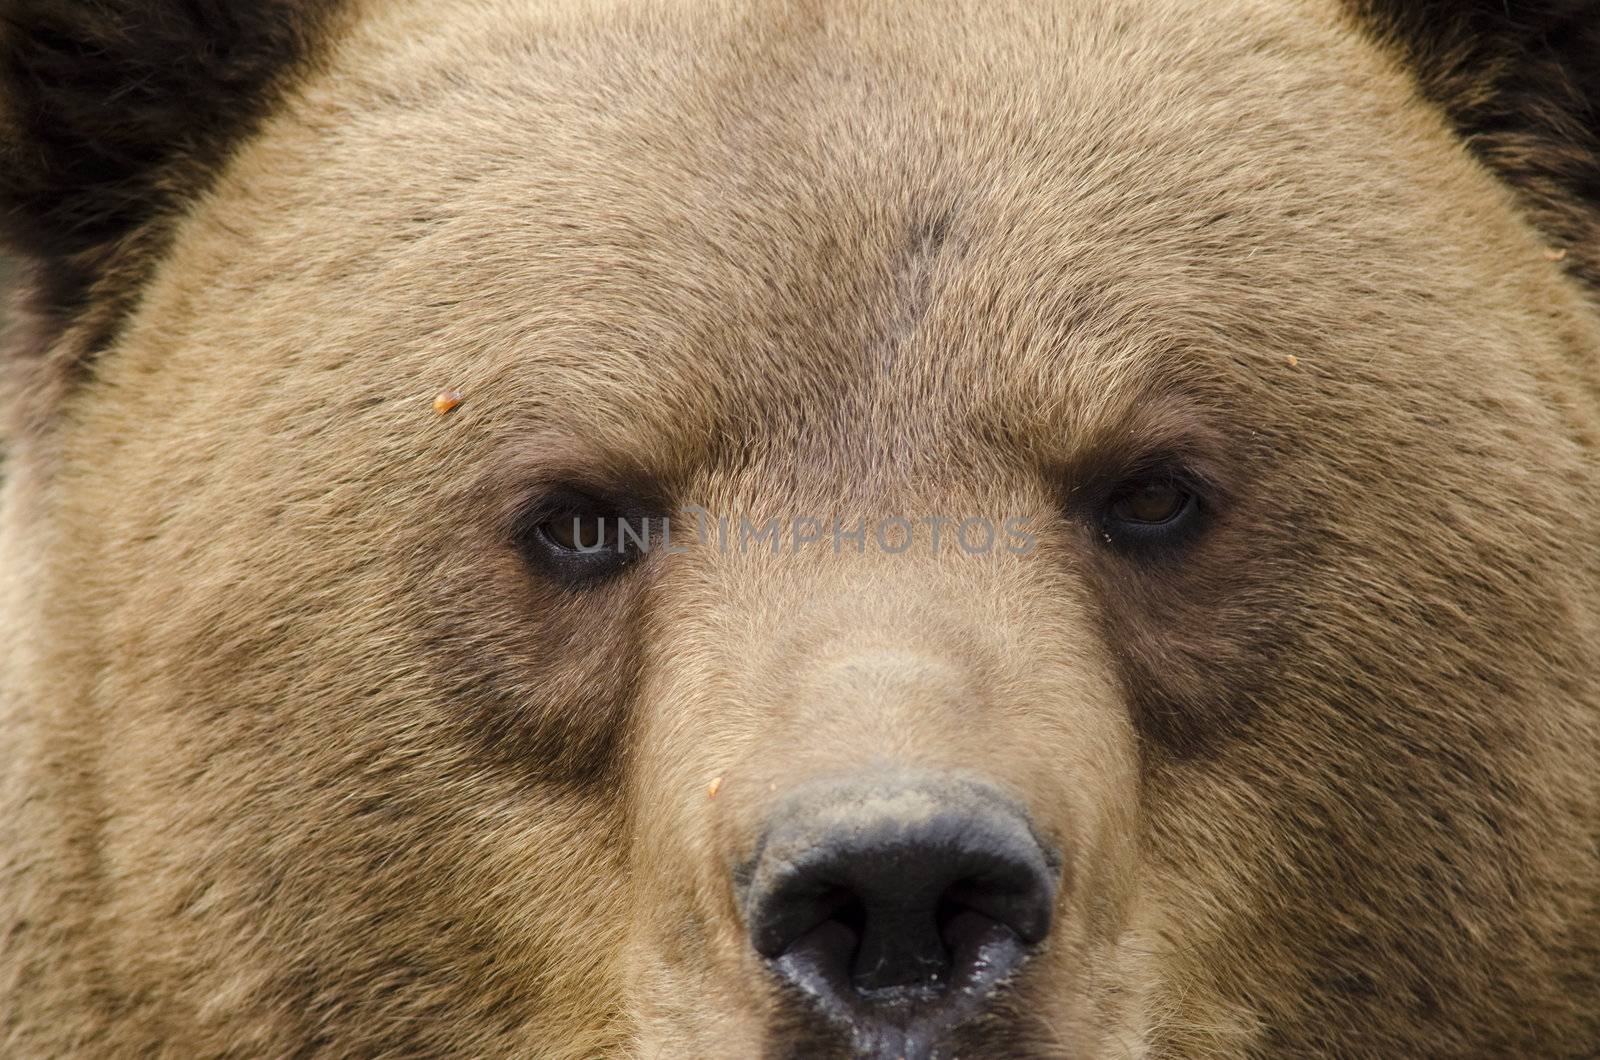 Portrait of a brouwn bear with the nose and the eyes